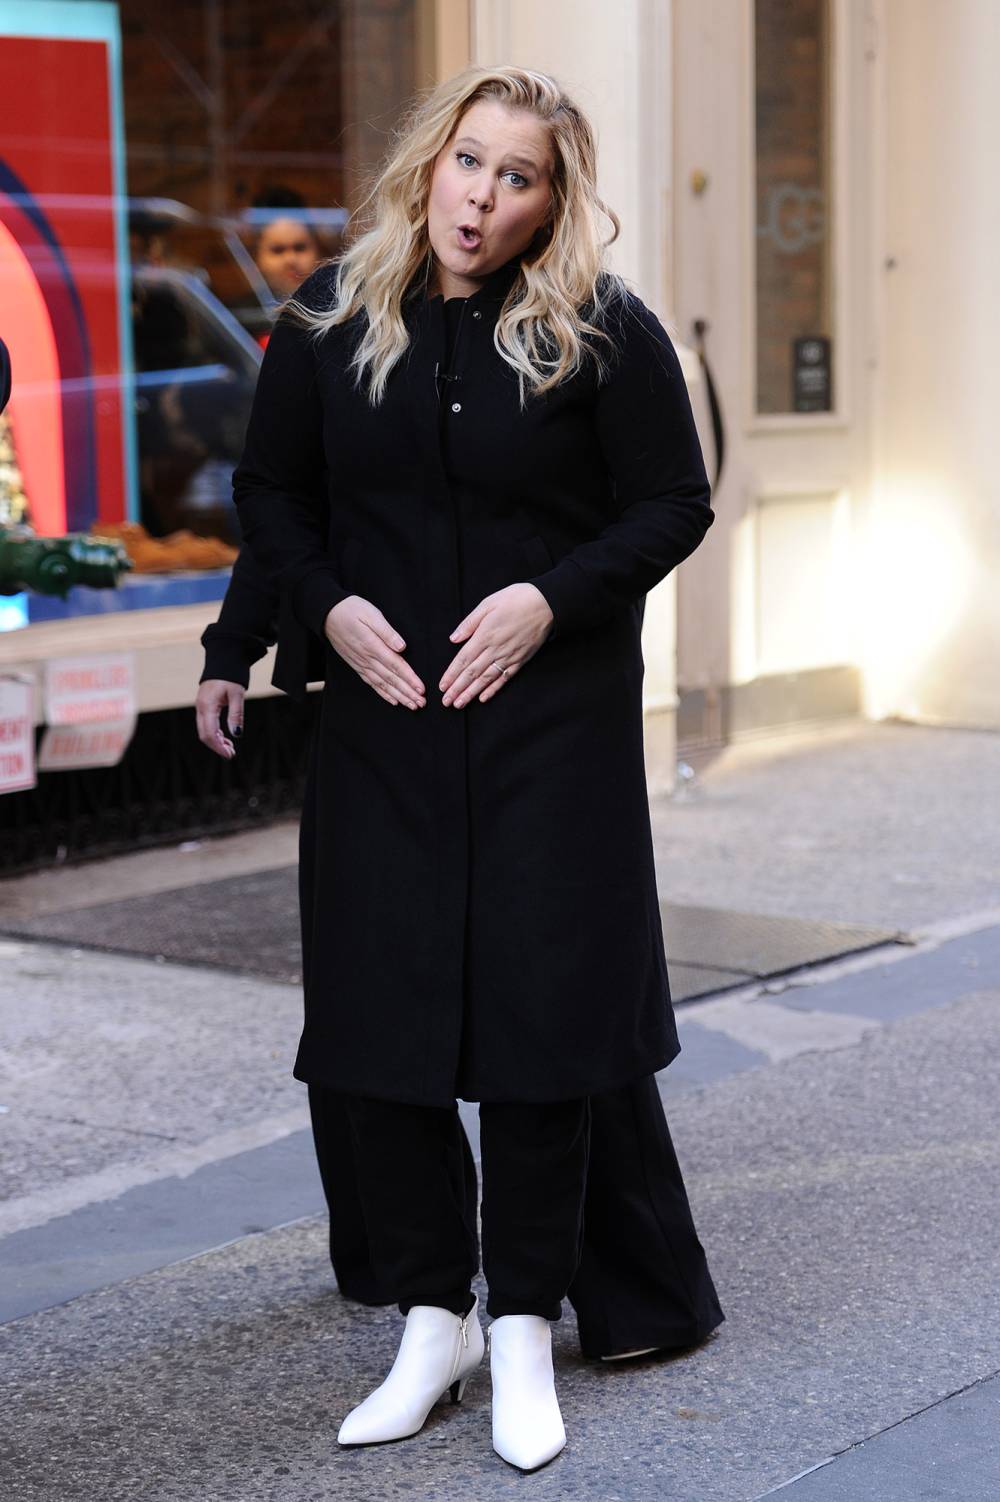 Amy Schumer Shows Off Baby Bump